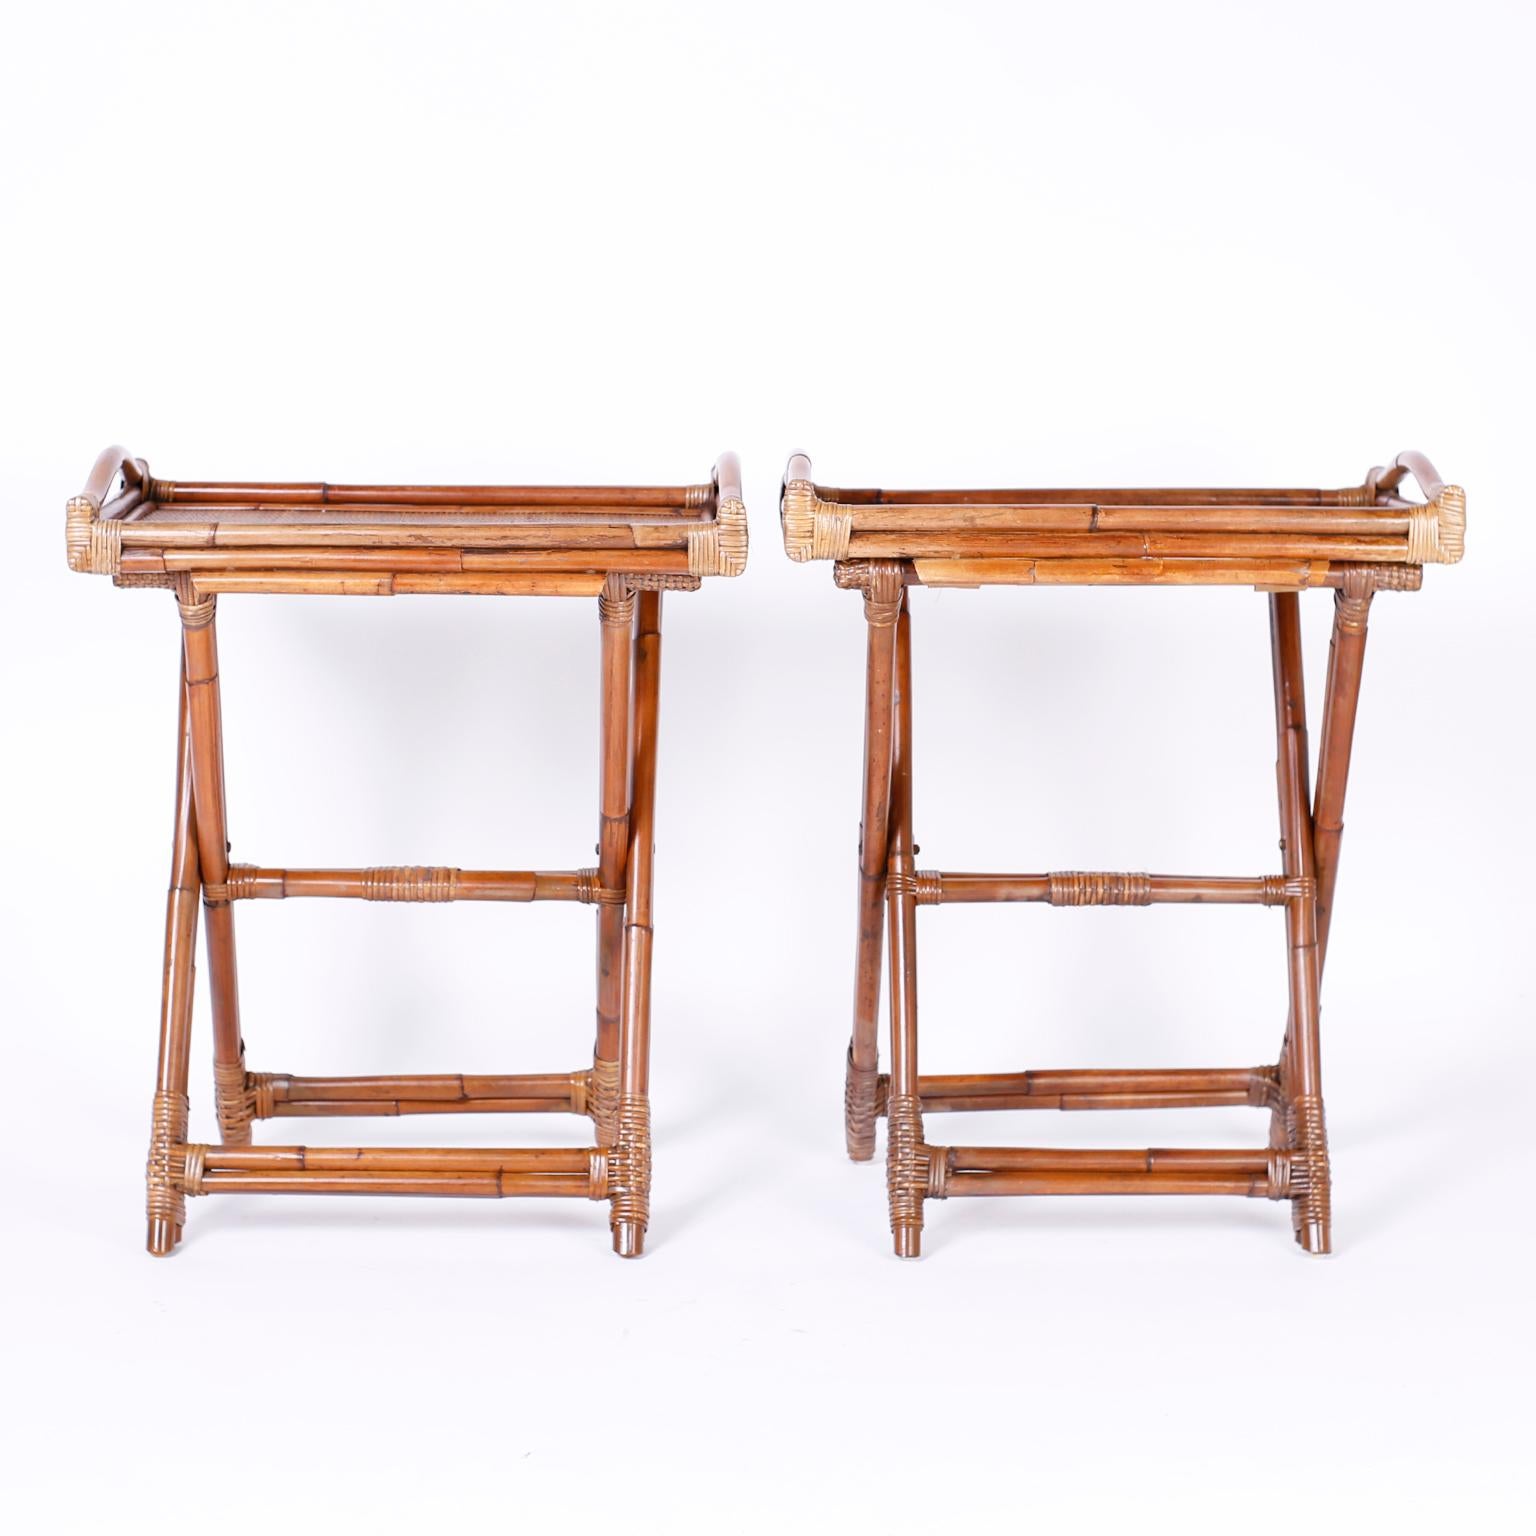 British colonial serving stands with removable trays having handles, grasscloth surfaces, and reed wrapped corners sitting on bamboo folding X-form bases with reed wrapped joints.